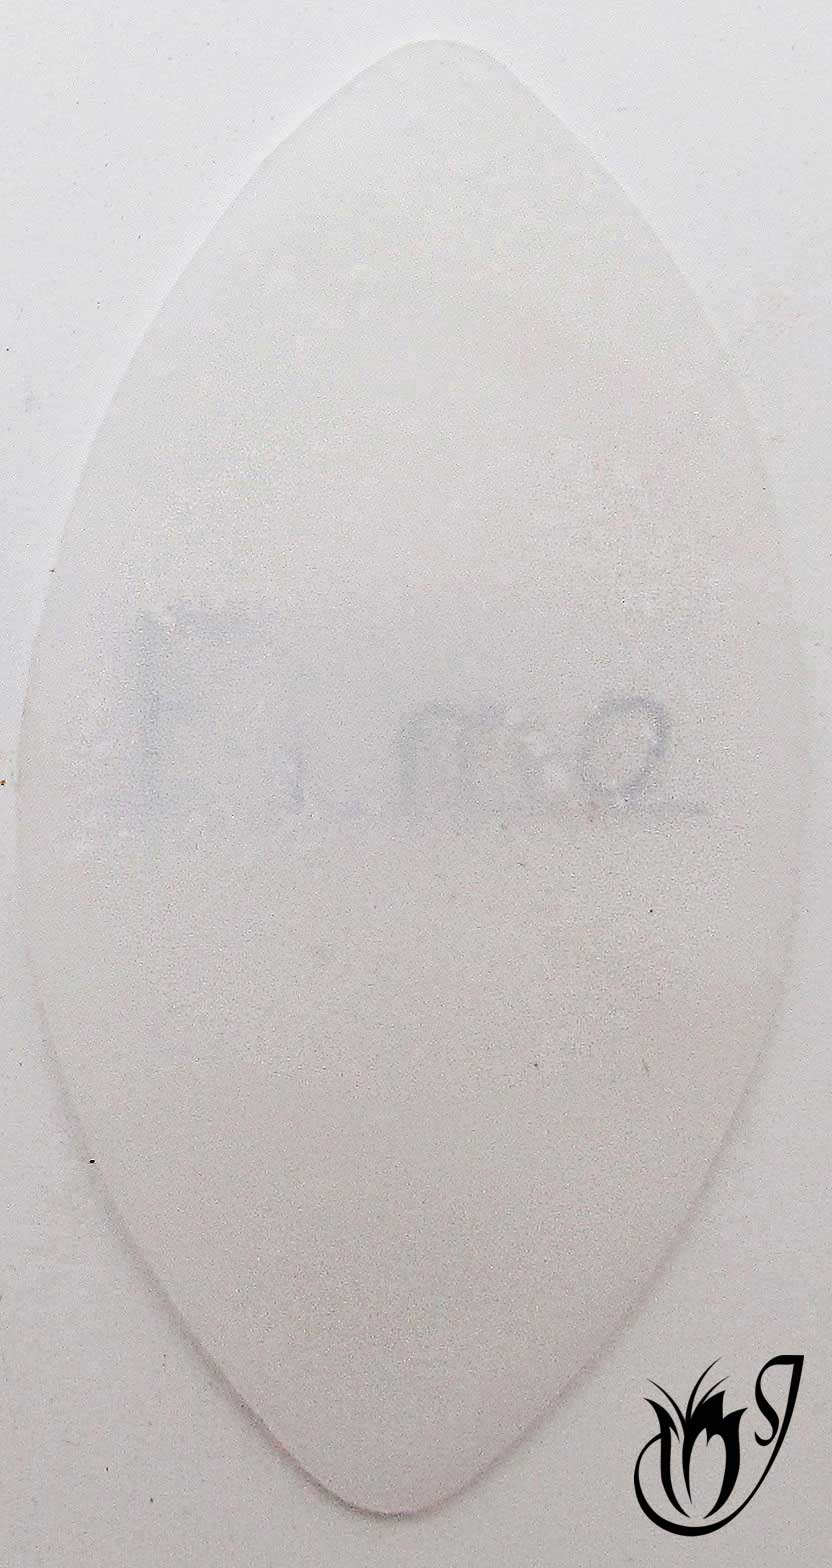 Thin translucent Fimo polymer clay